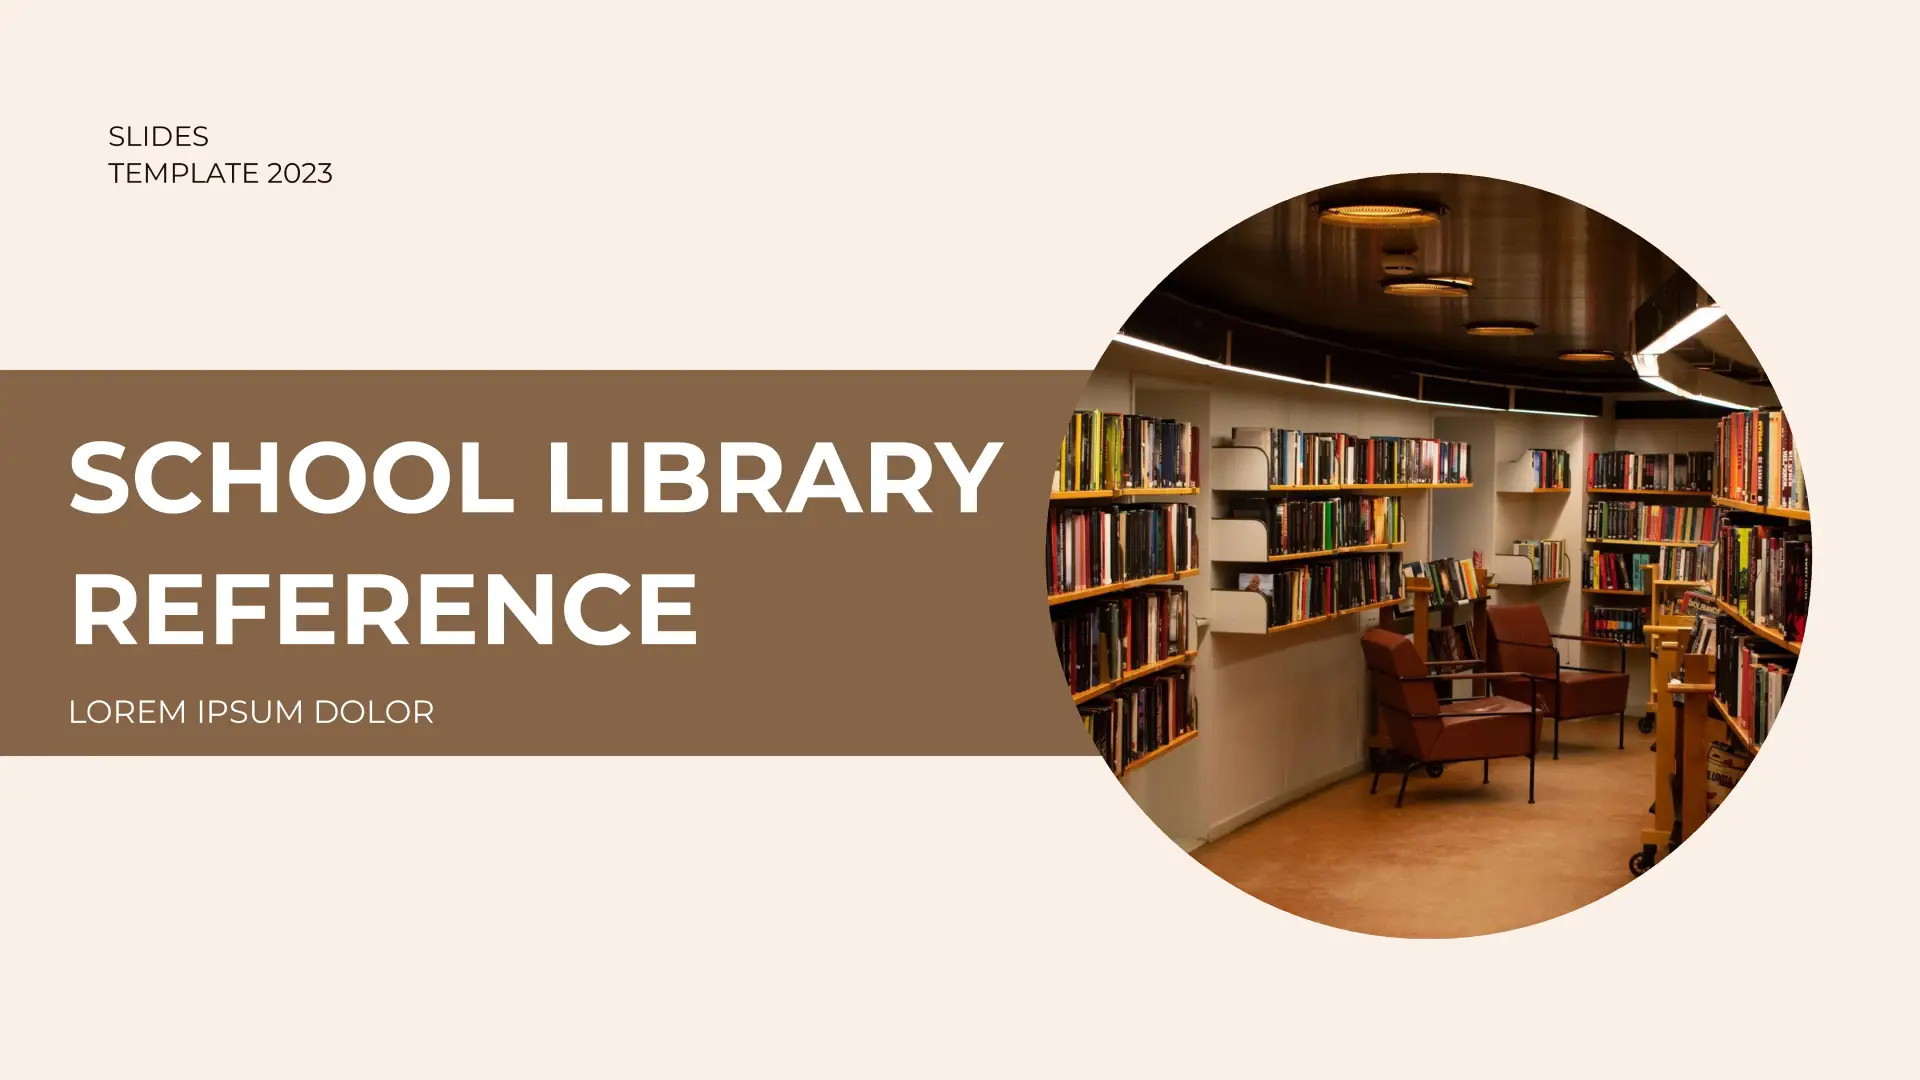 School Library Reference Template for Google Slides